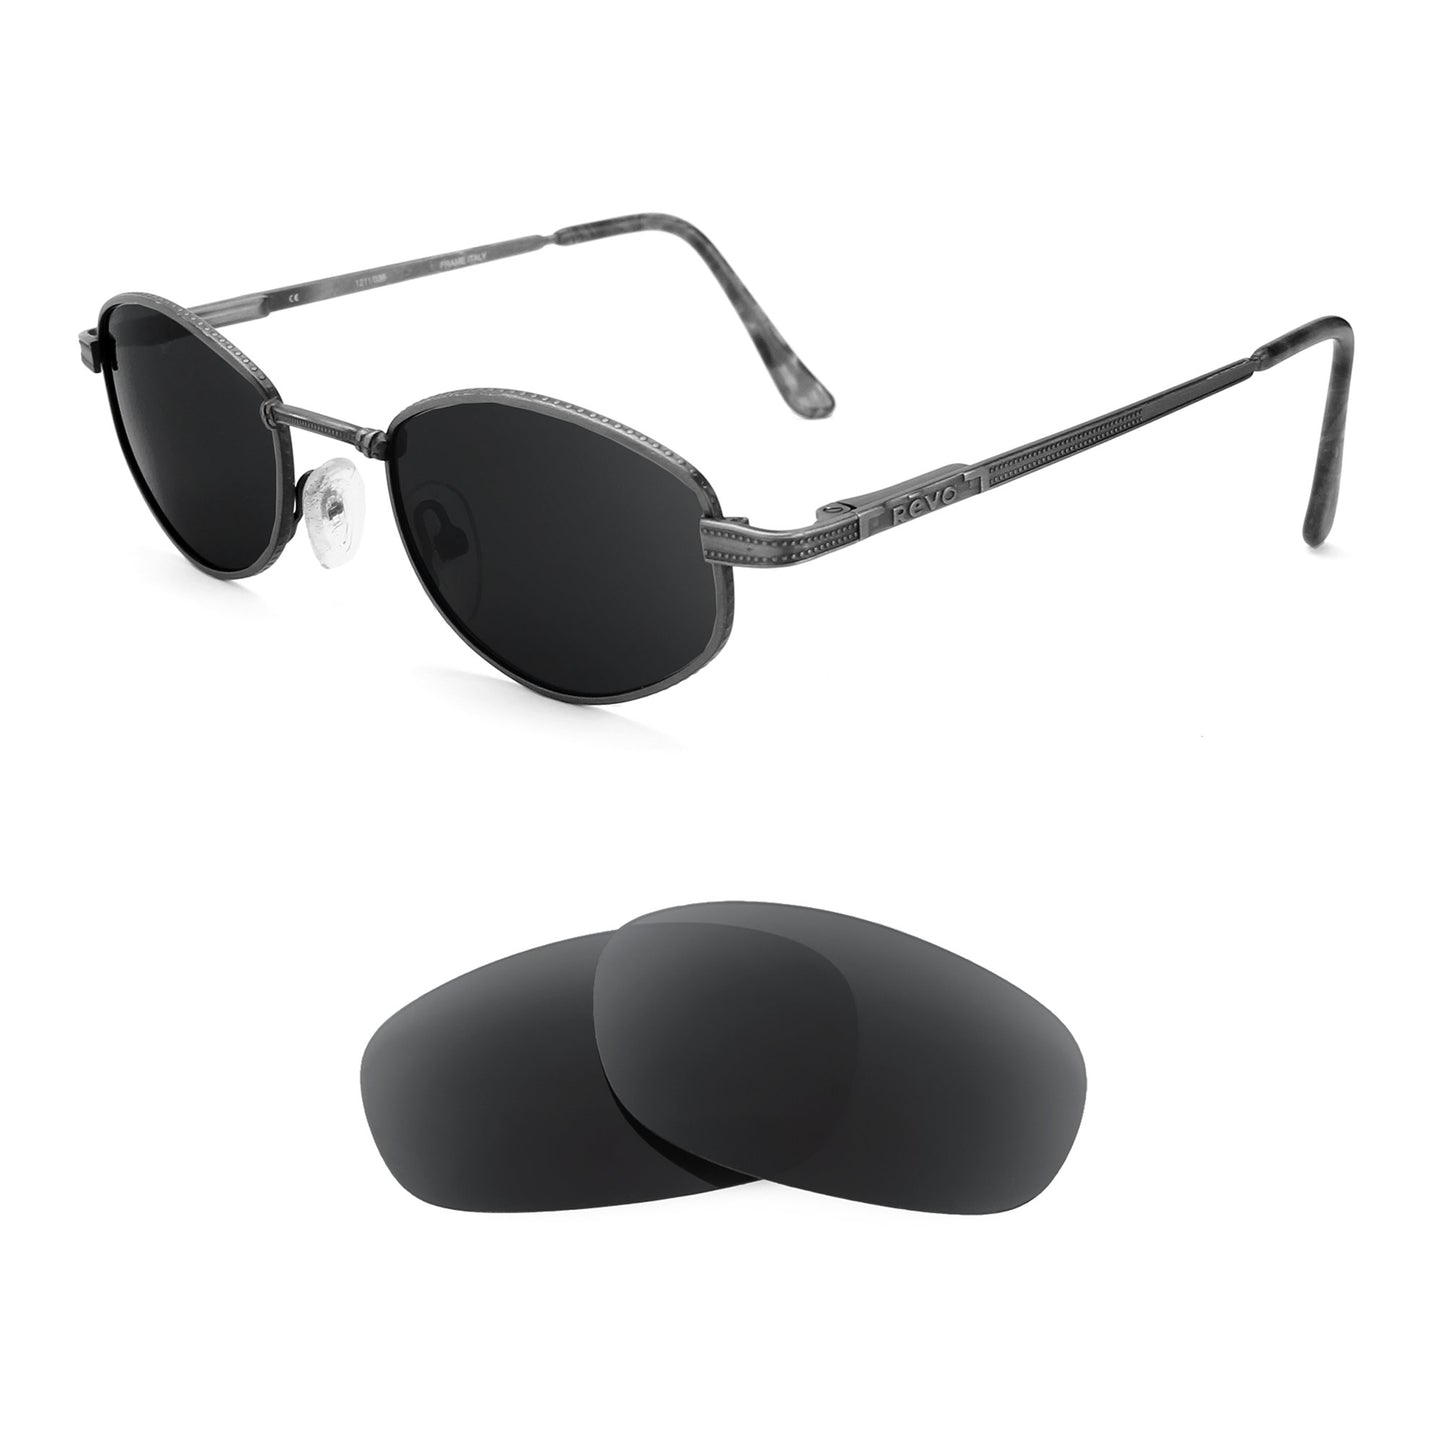 Revo Atherton 1211 sunglasses with replacement lenses